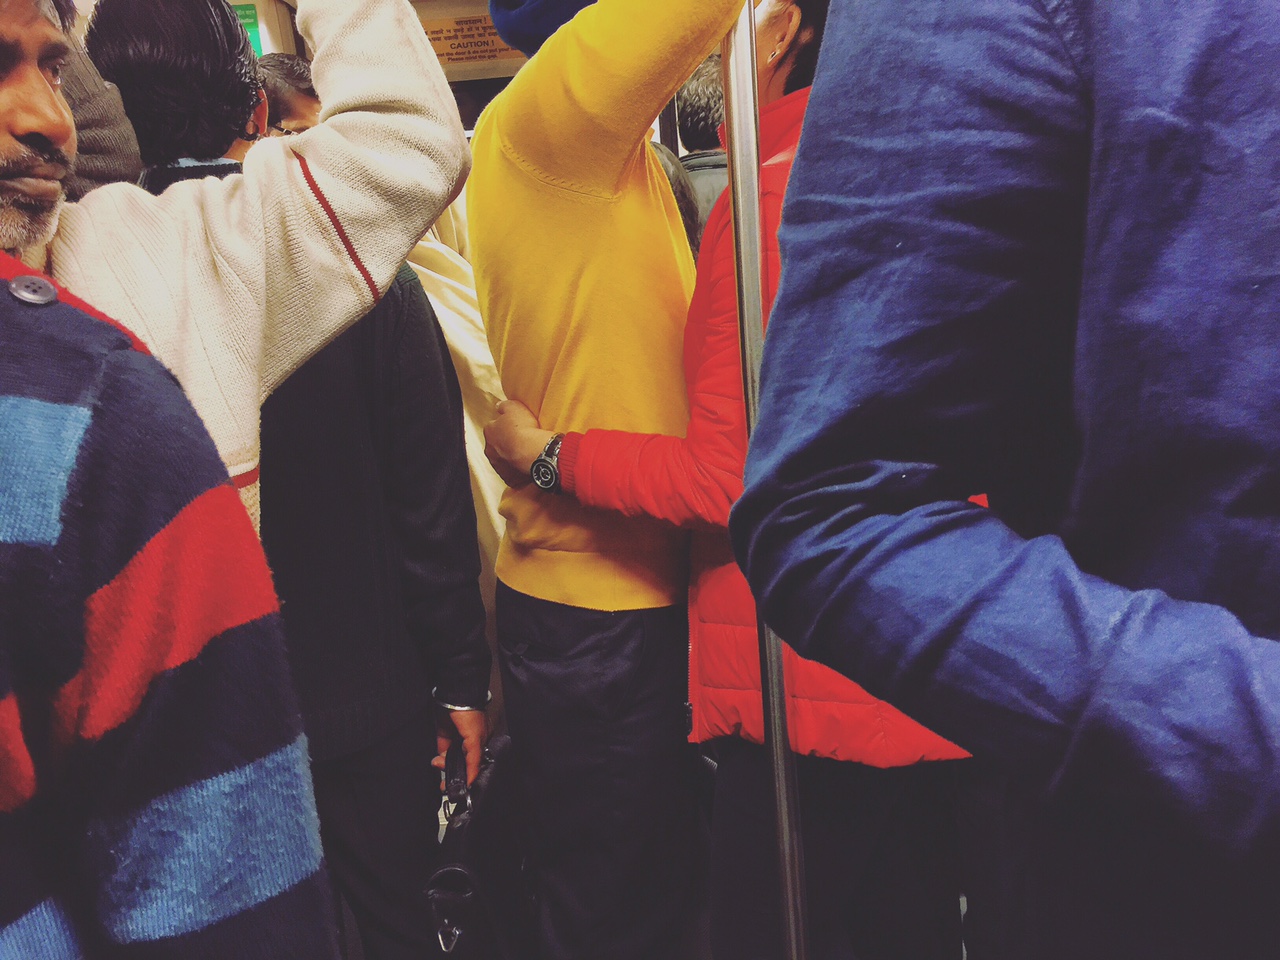 Delhi Metro – Two Lovers in My Coach, Yellow Line